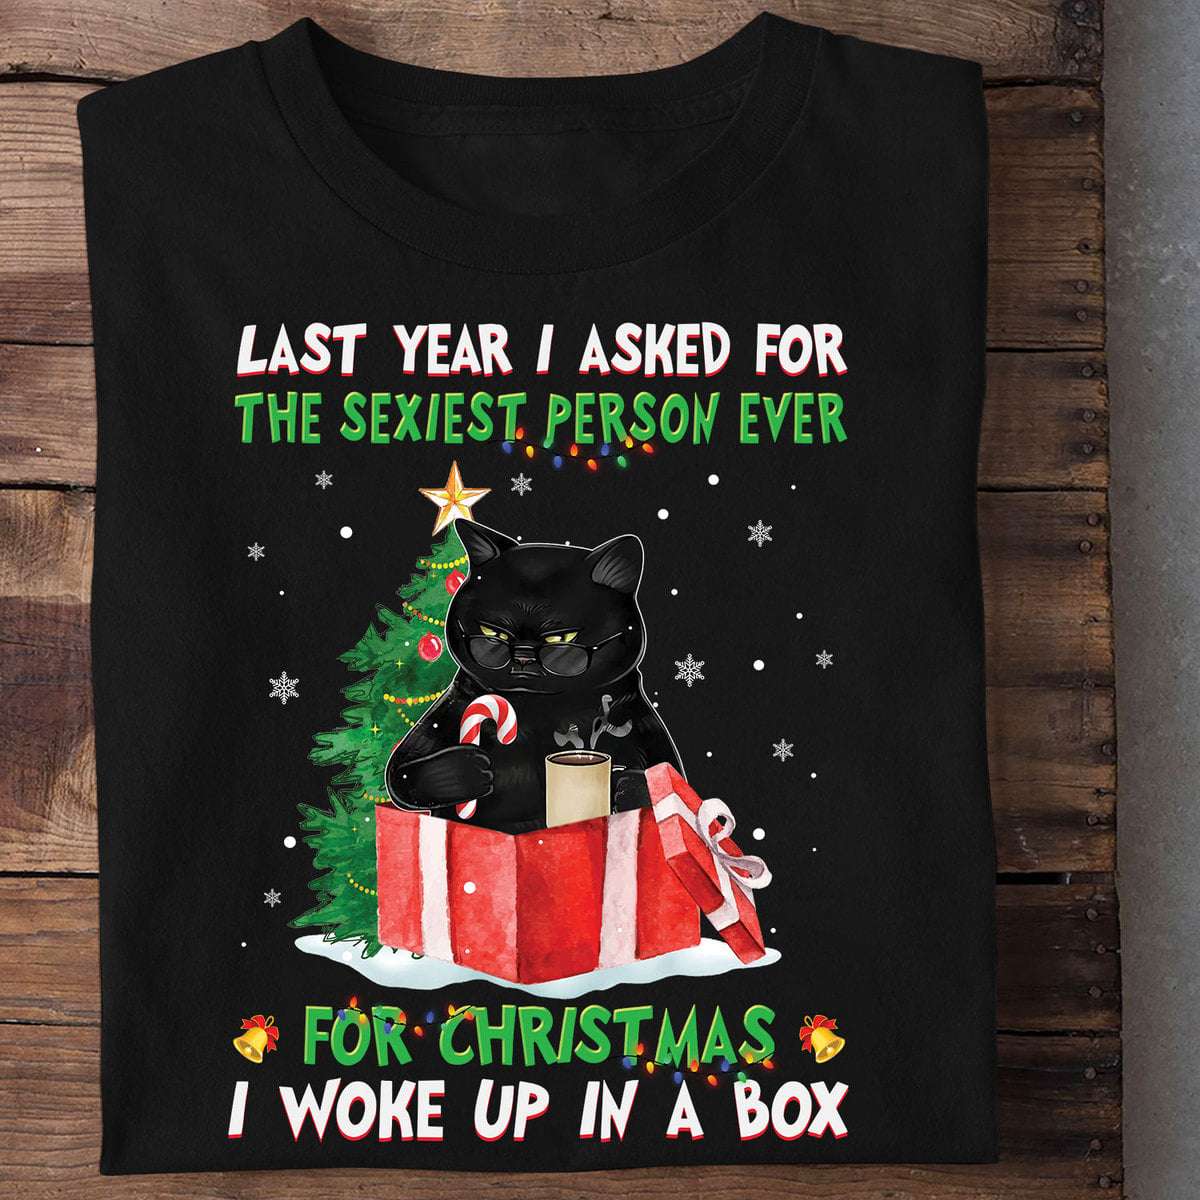 The sexiest person ever for Christmas - Christmas day gift, black cat gift